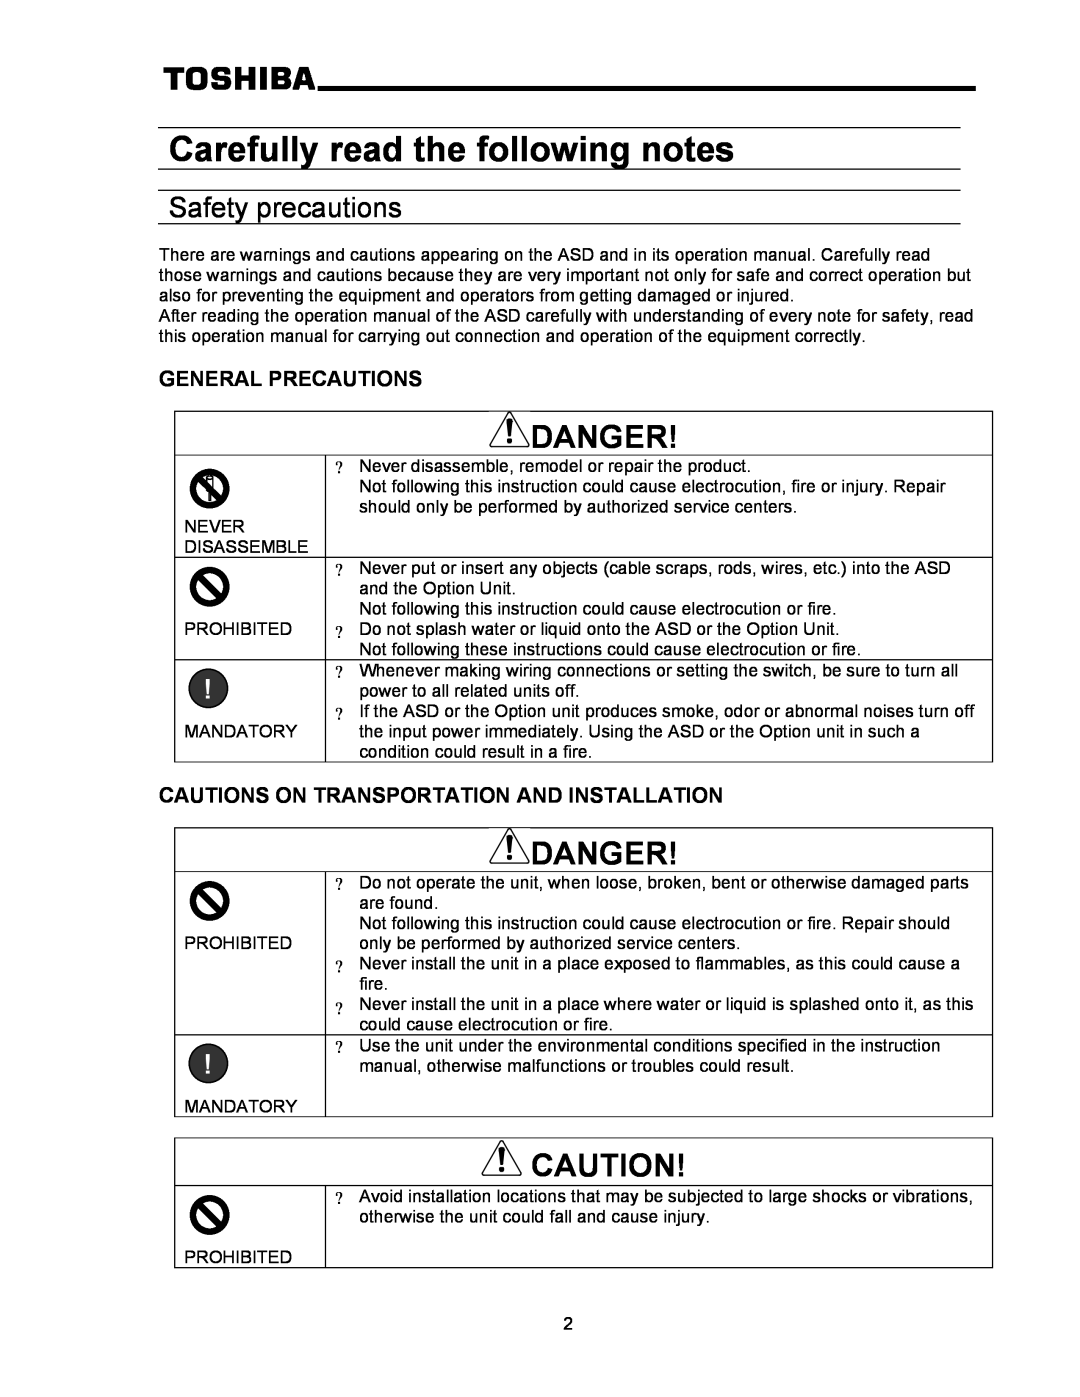 Toshiba RS-485 operation manual Carefully read the following notes, Danger, Safety precautions, General Precautions 